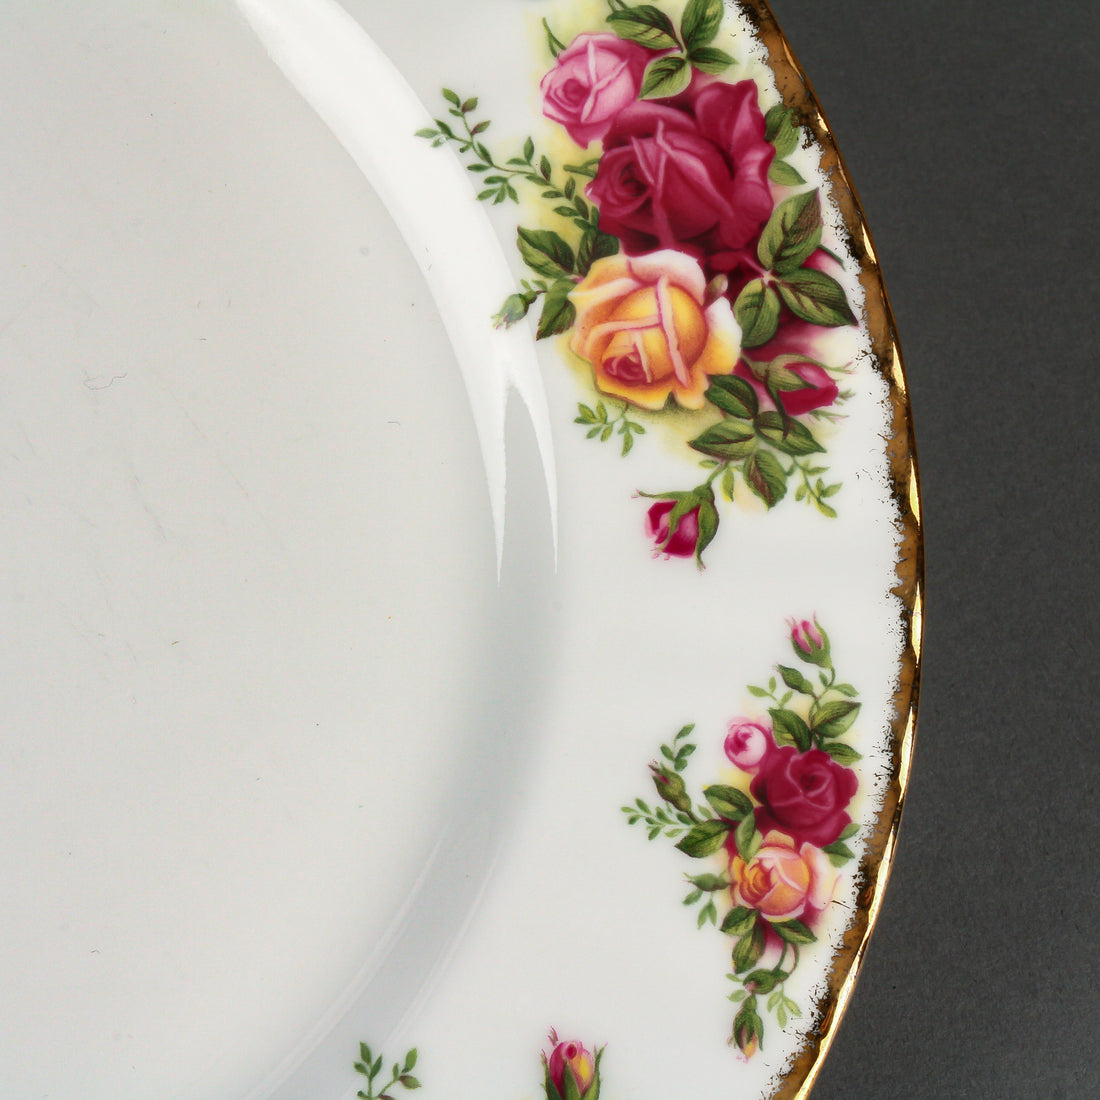 ROYAL ALBERT Old Country Roses - 10 Place Settings +